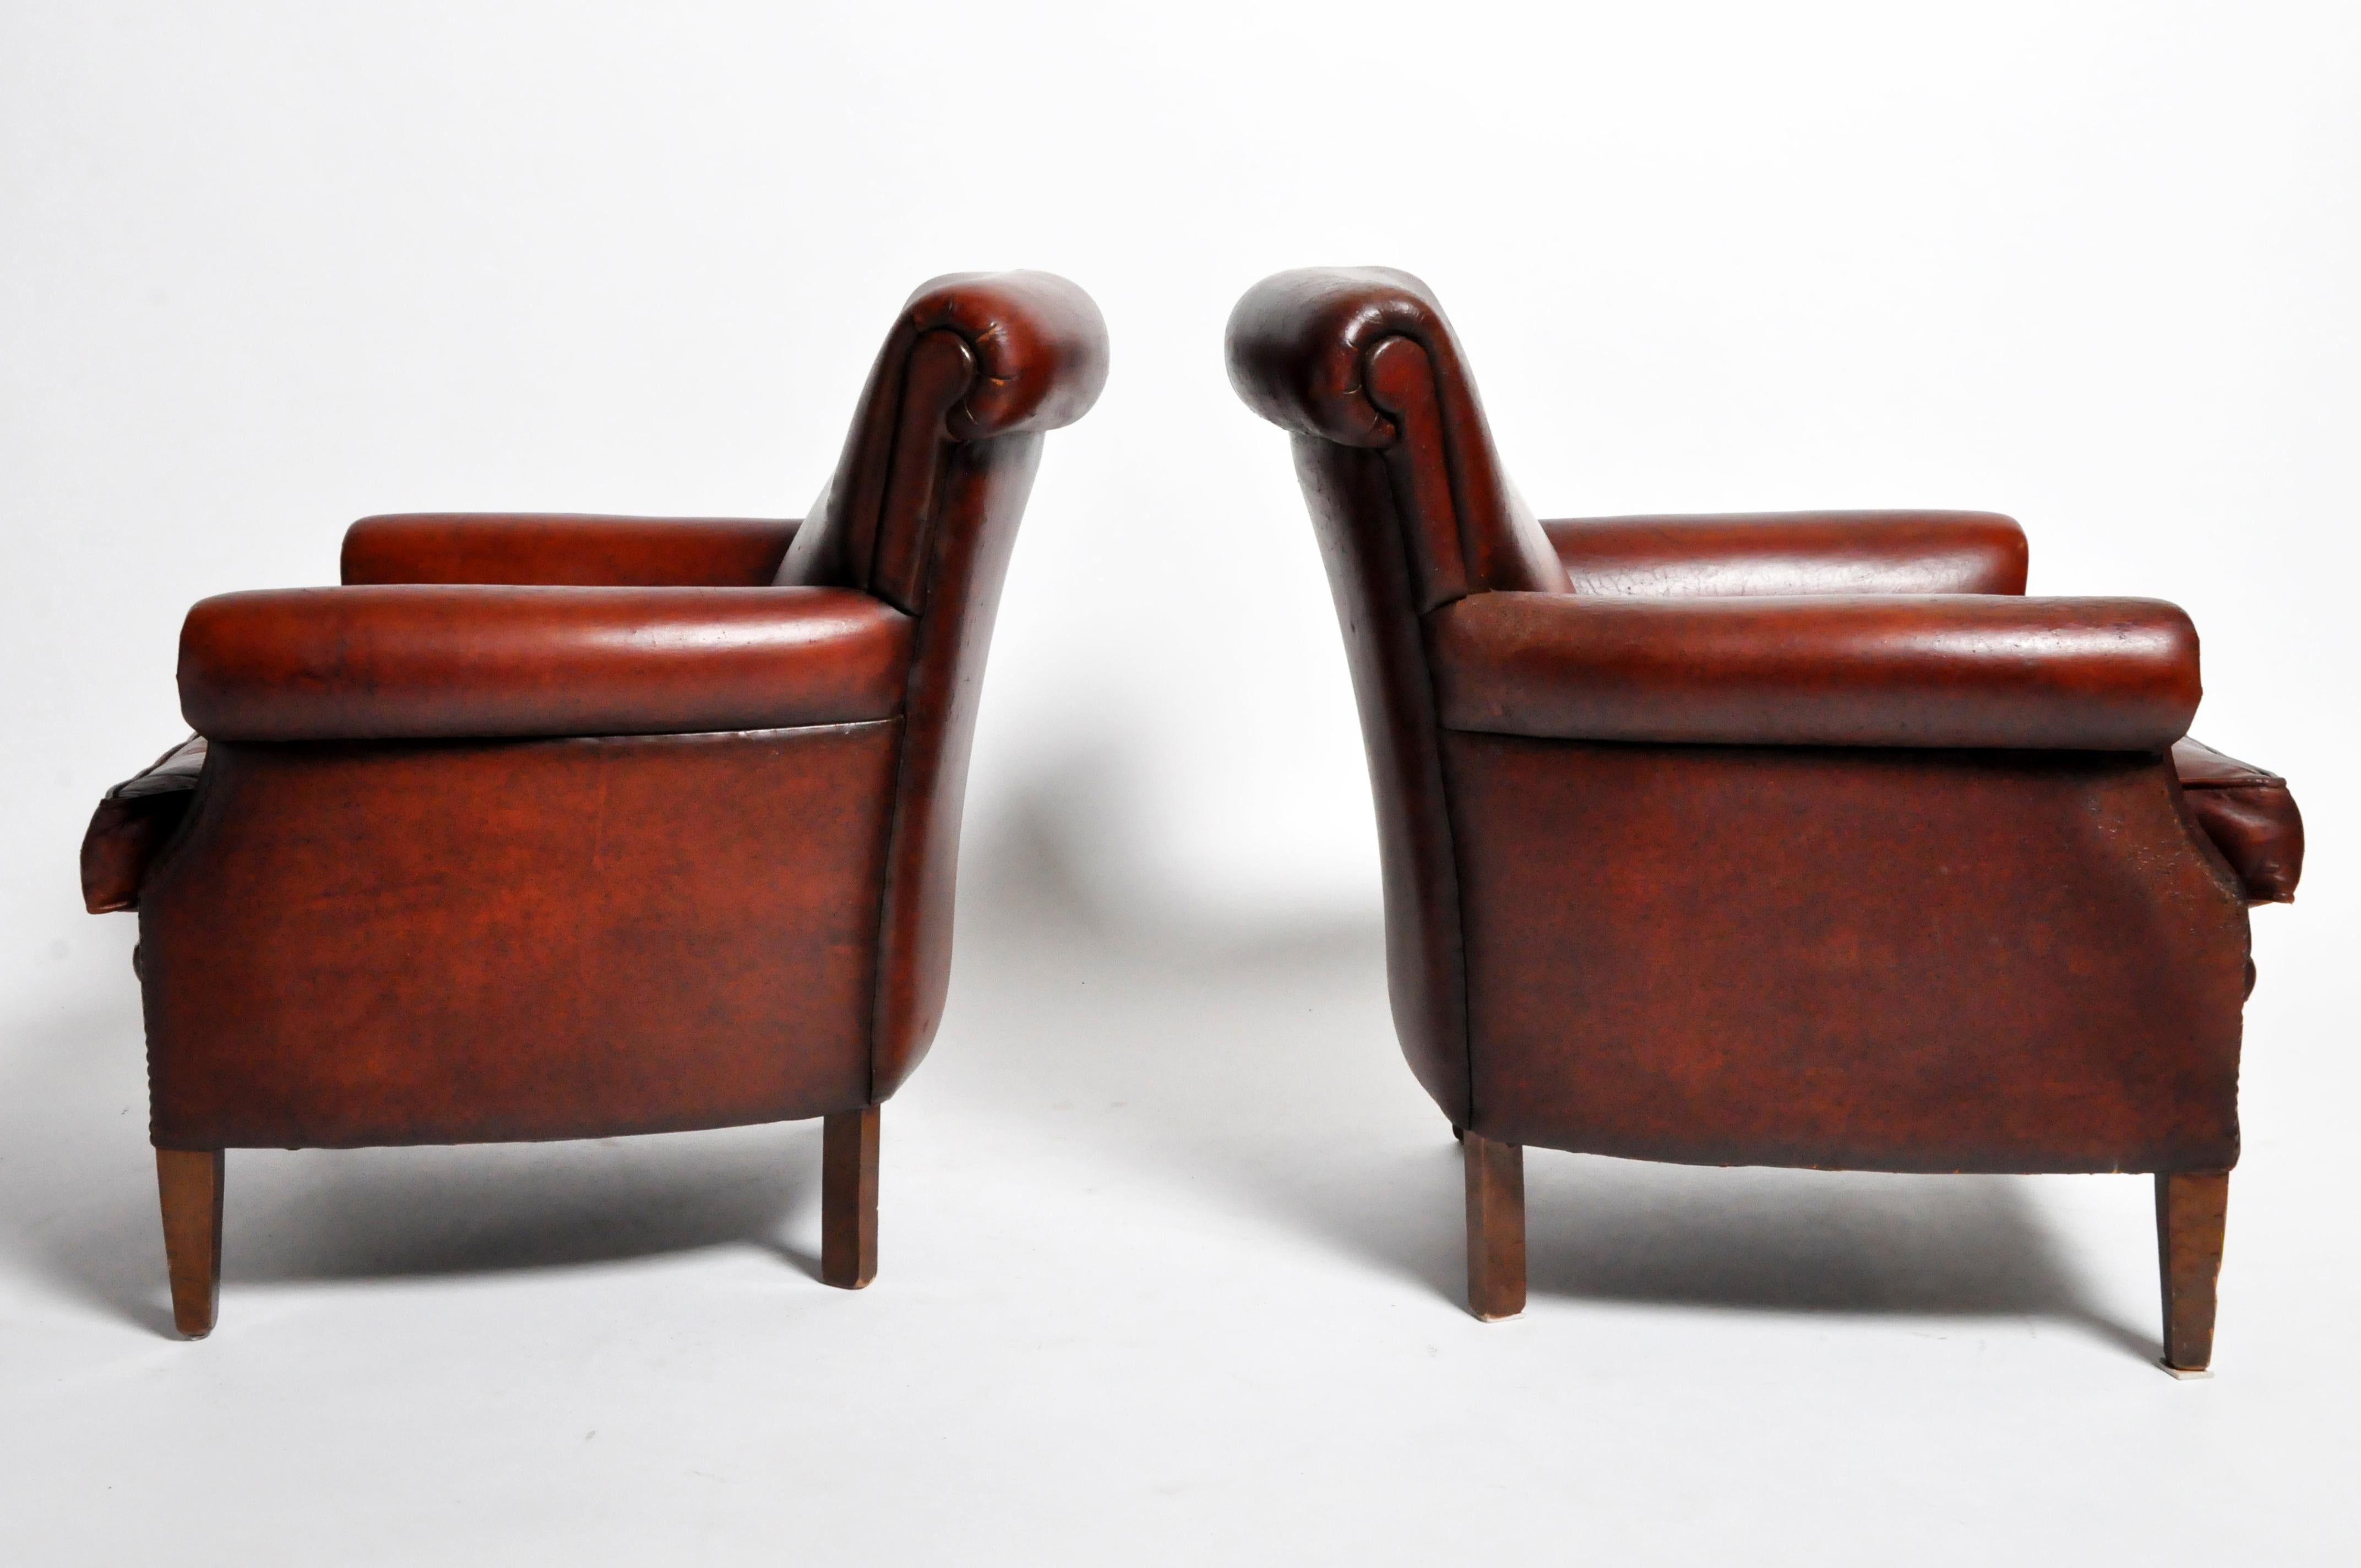 This handsome pair of Art Deco Chairs is from France and made from leather and hardwood. The chairs feature a beautifully aged patina, are comfortable and ready for everyday use. There are some areas of minor repair, consistent with age. Springs